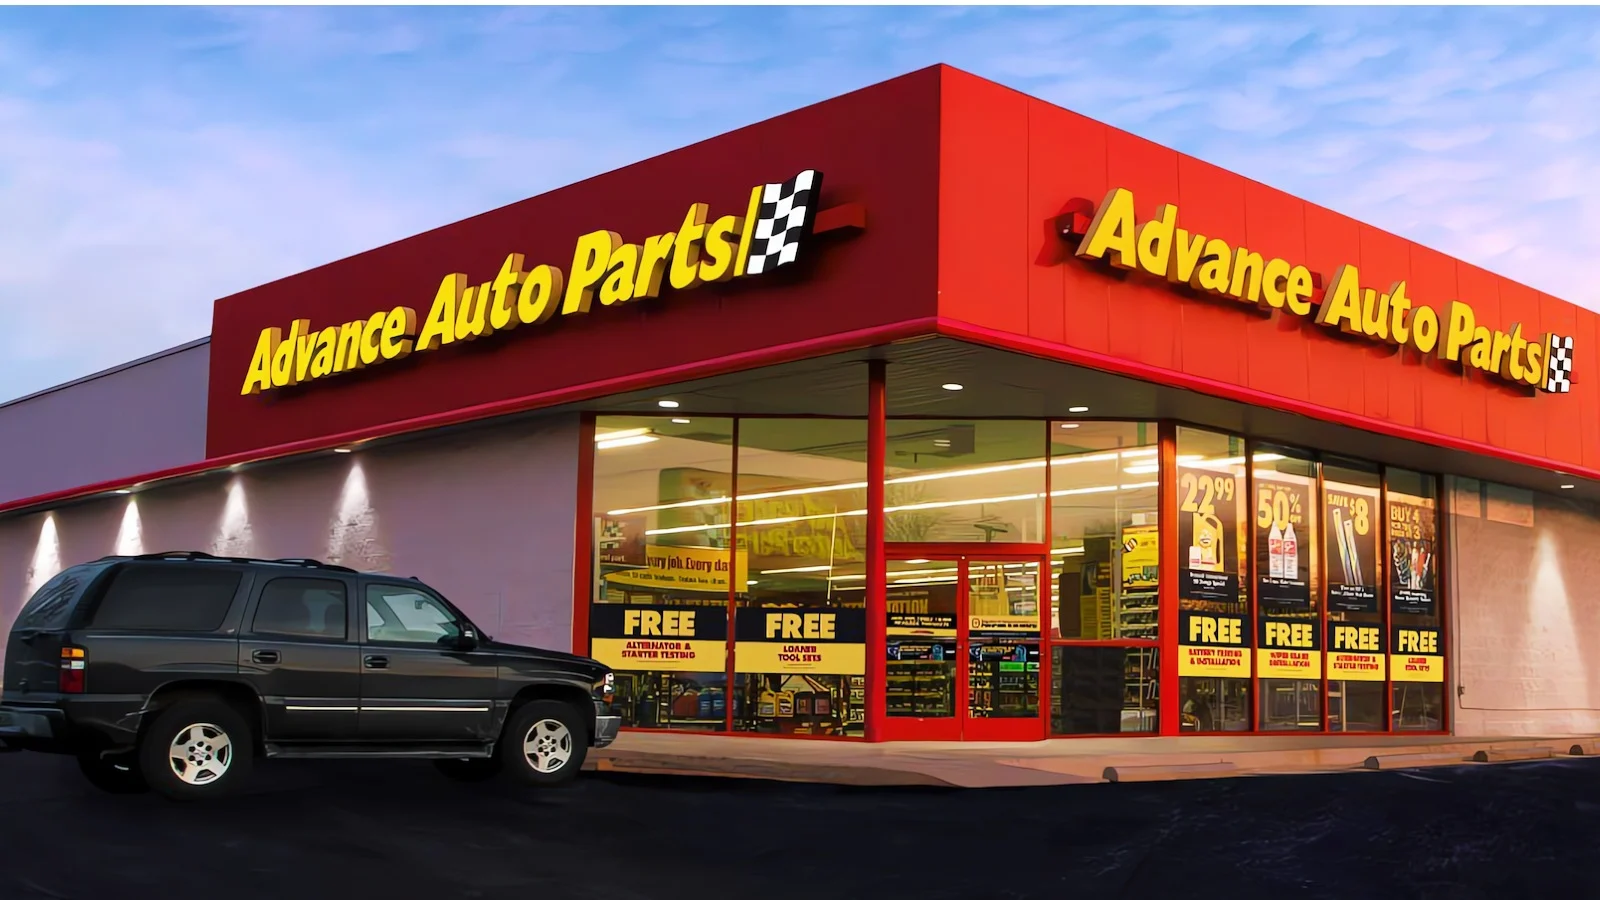 How a Major Car Parts Company Got Hacked The Full Story Behind Advance Auto Parts' Data Leak-